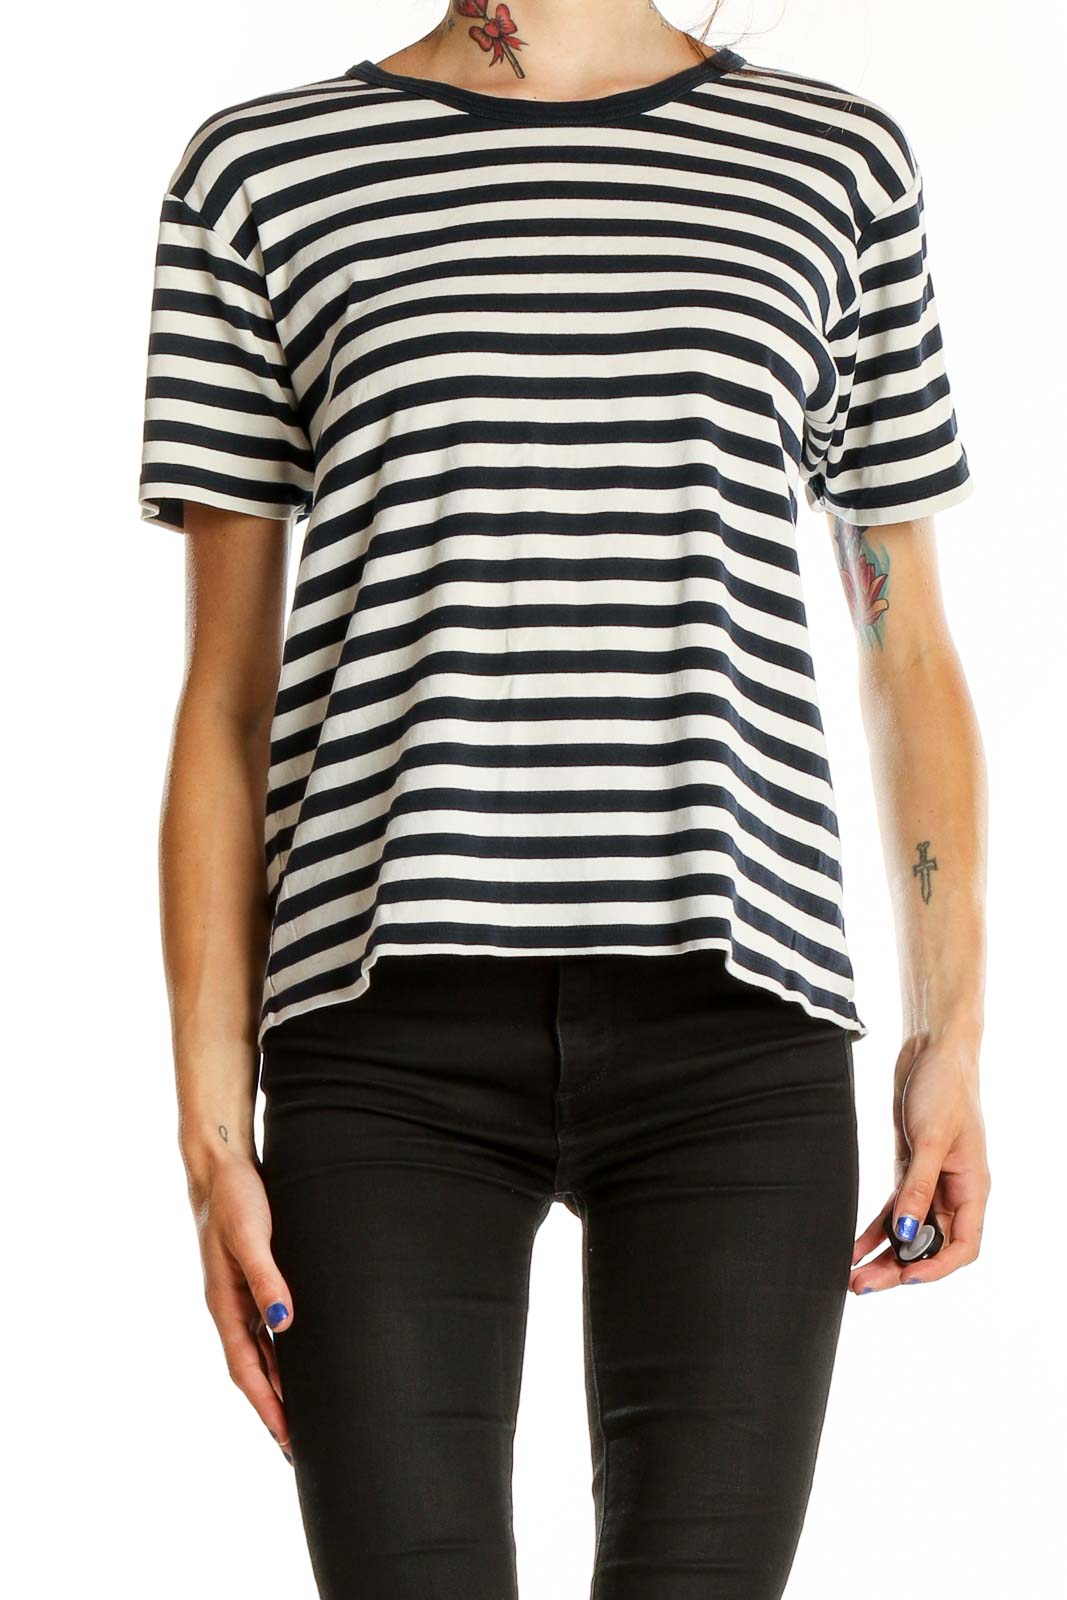 White Blue Striped T-Shirt Front